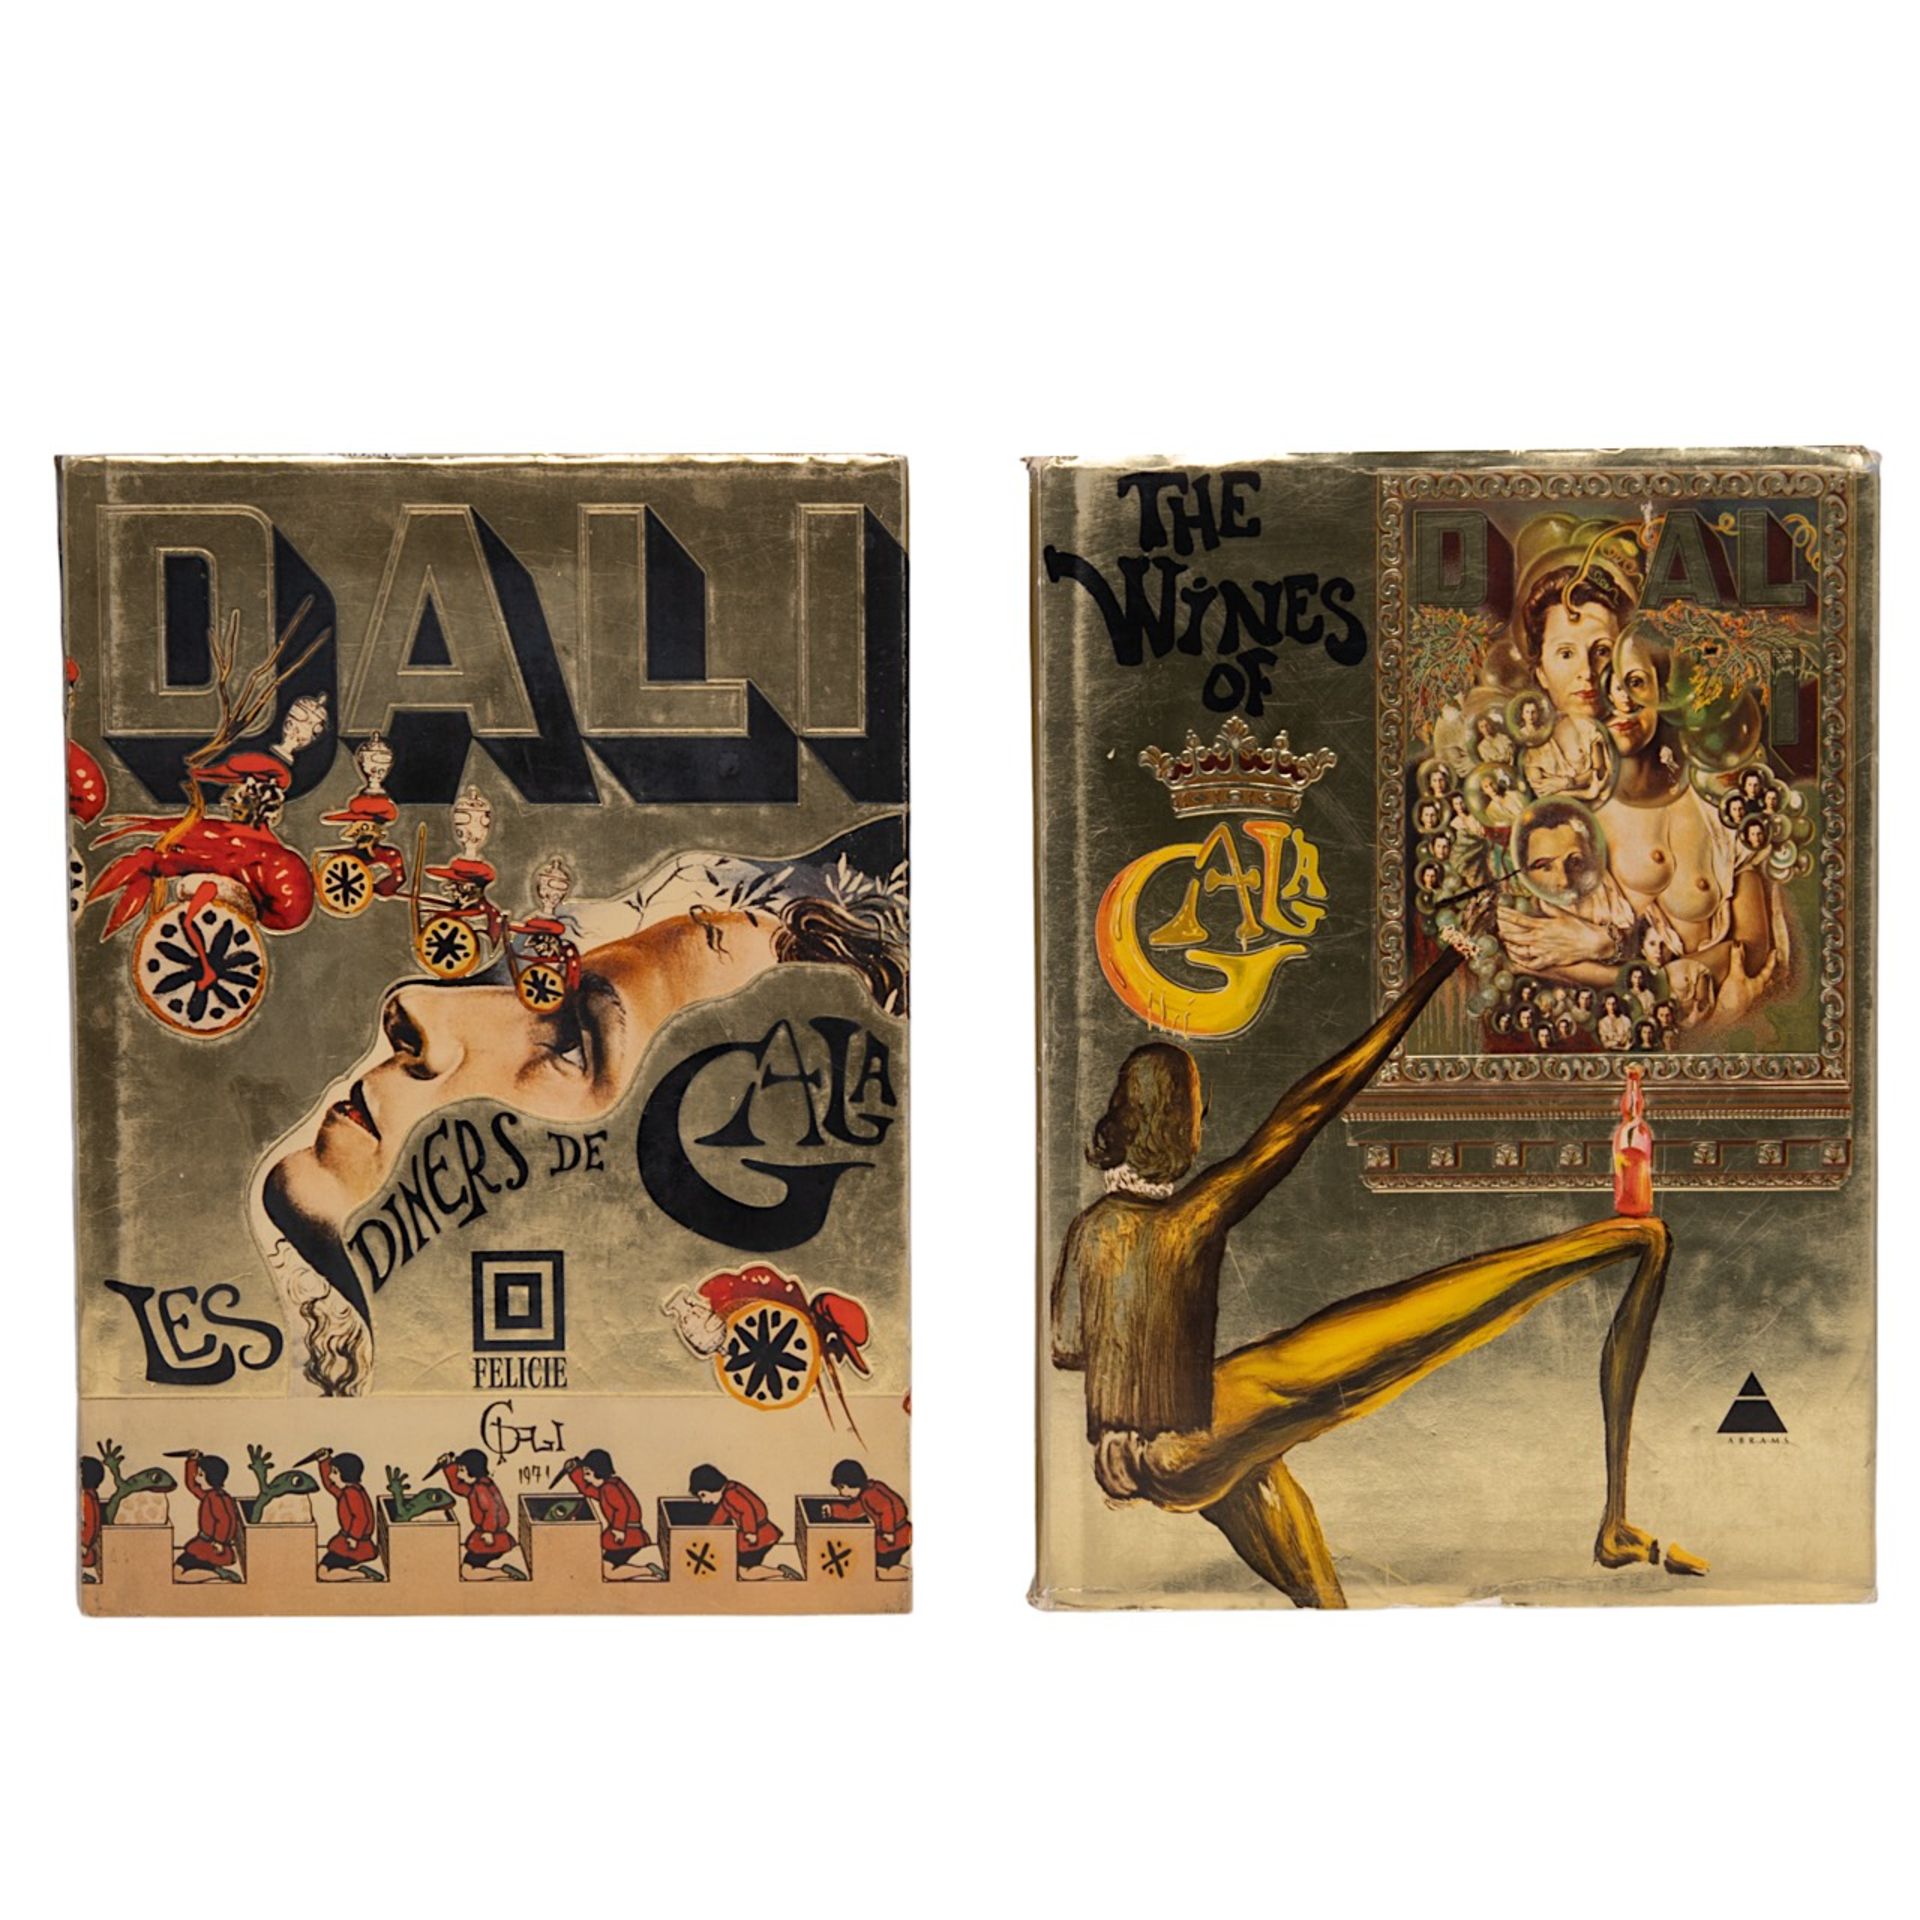 Two gastronomical books by Salvador Dali (1904-1989), 'Les Diners de Gala' and 'The Wines of Gala'